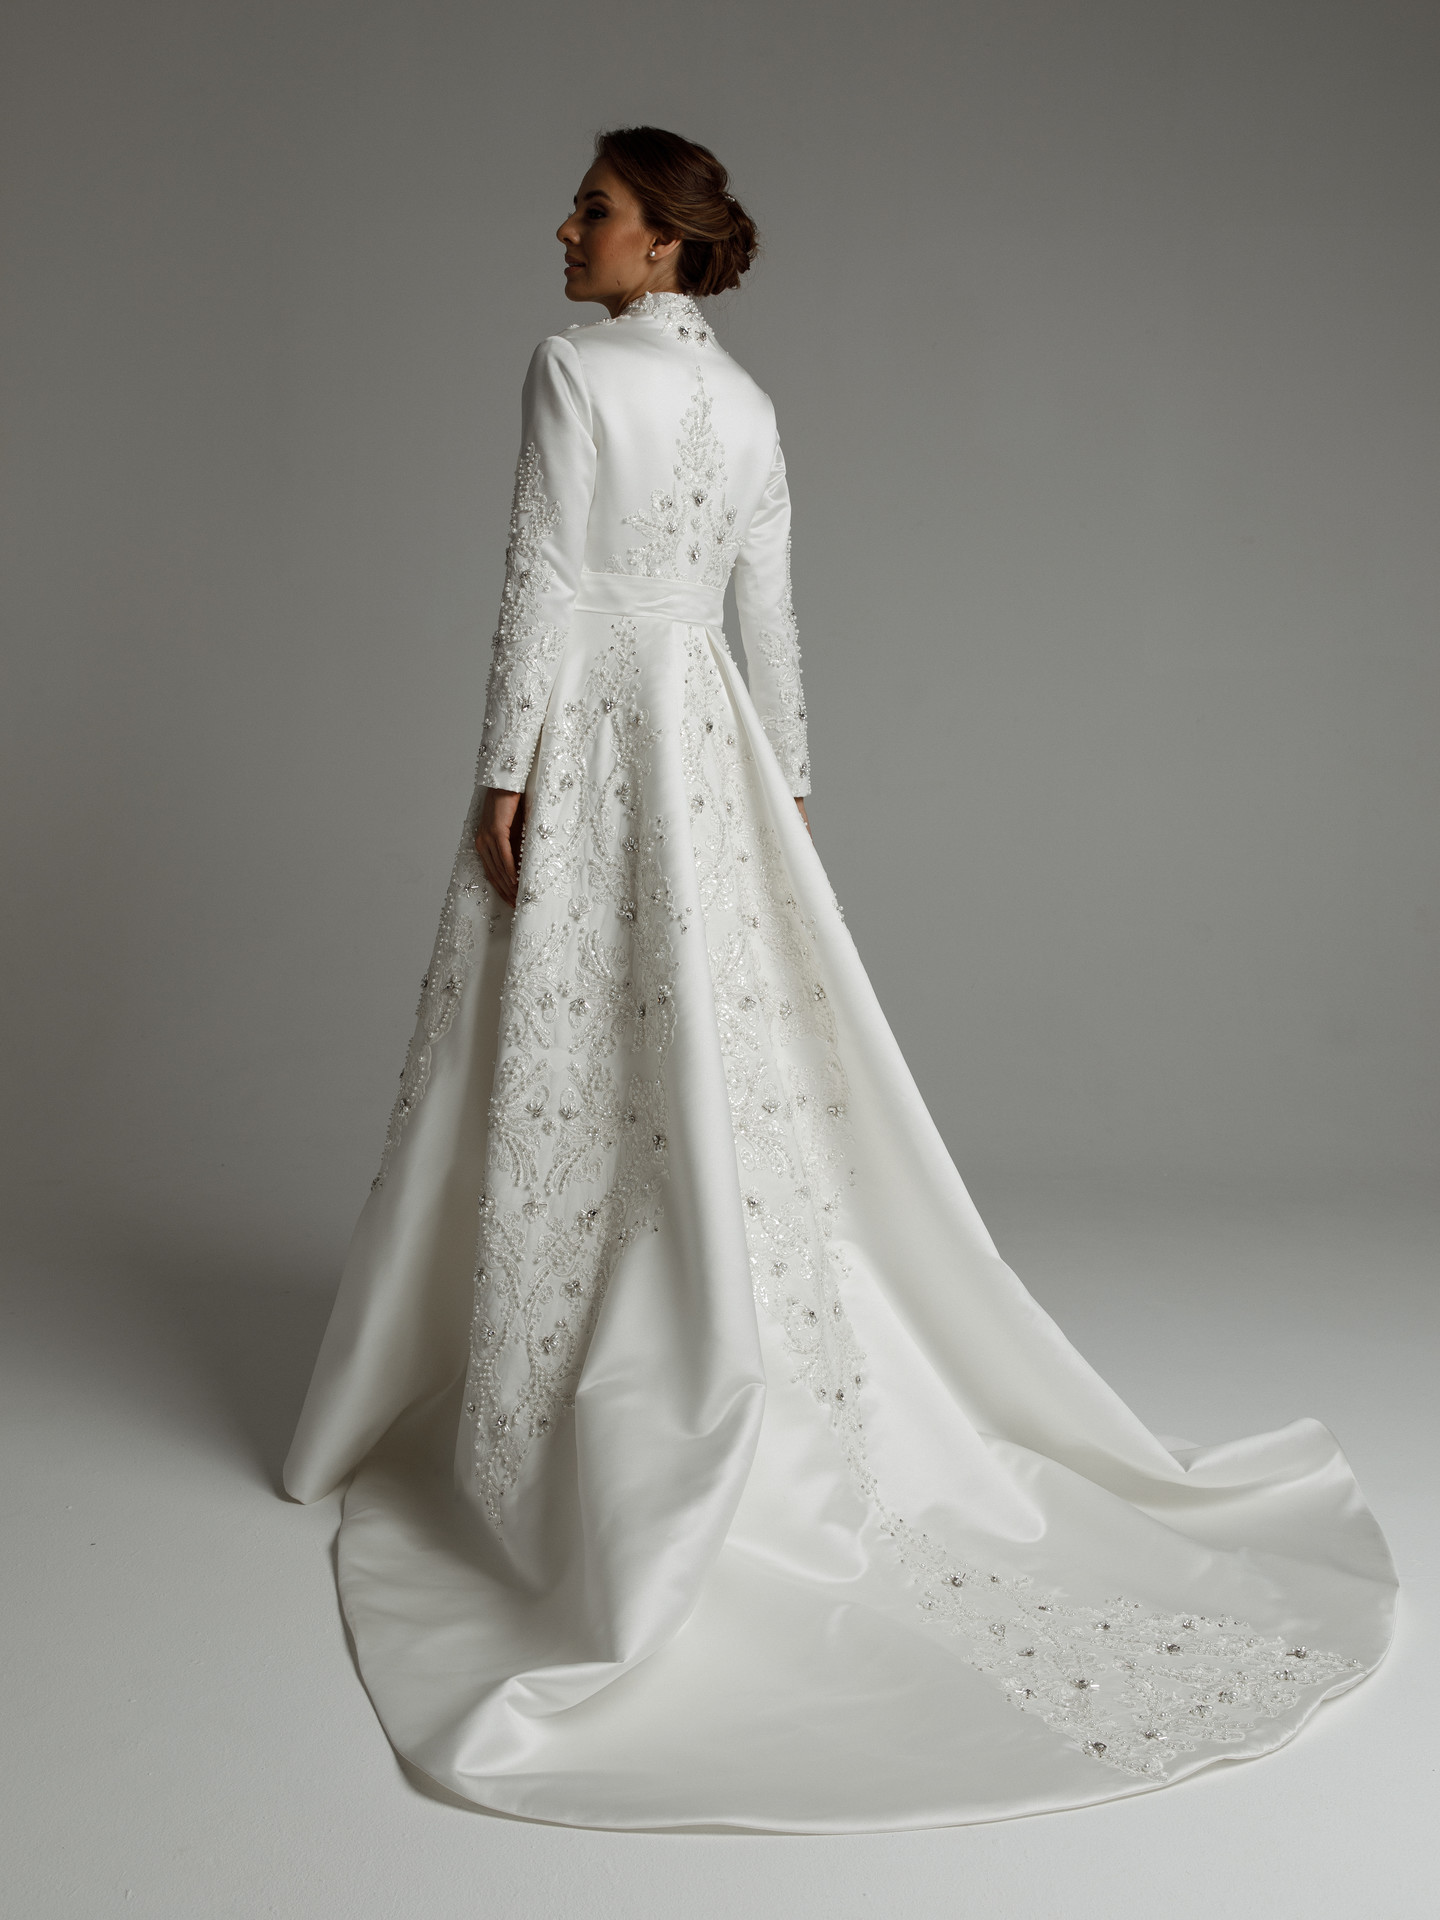 Gertrude gown, 2021, couture, dress, bridal, off-white, satin, embroidery, A-line, train, sleeves, lace